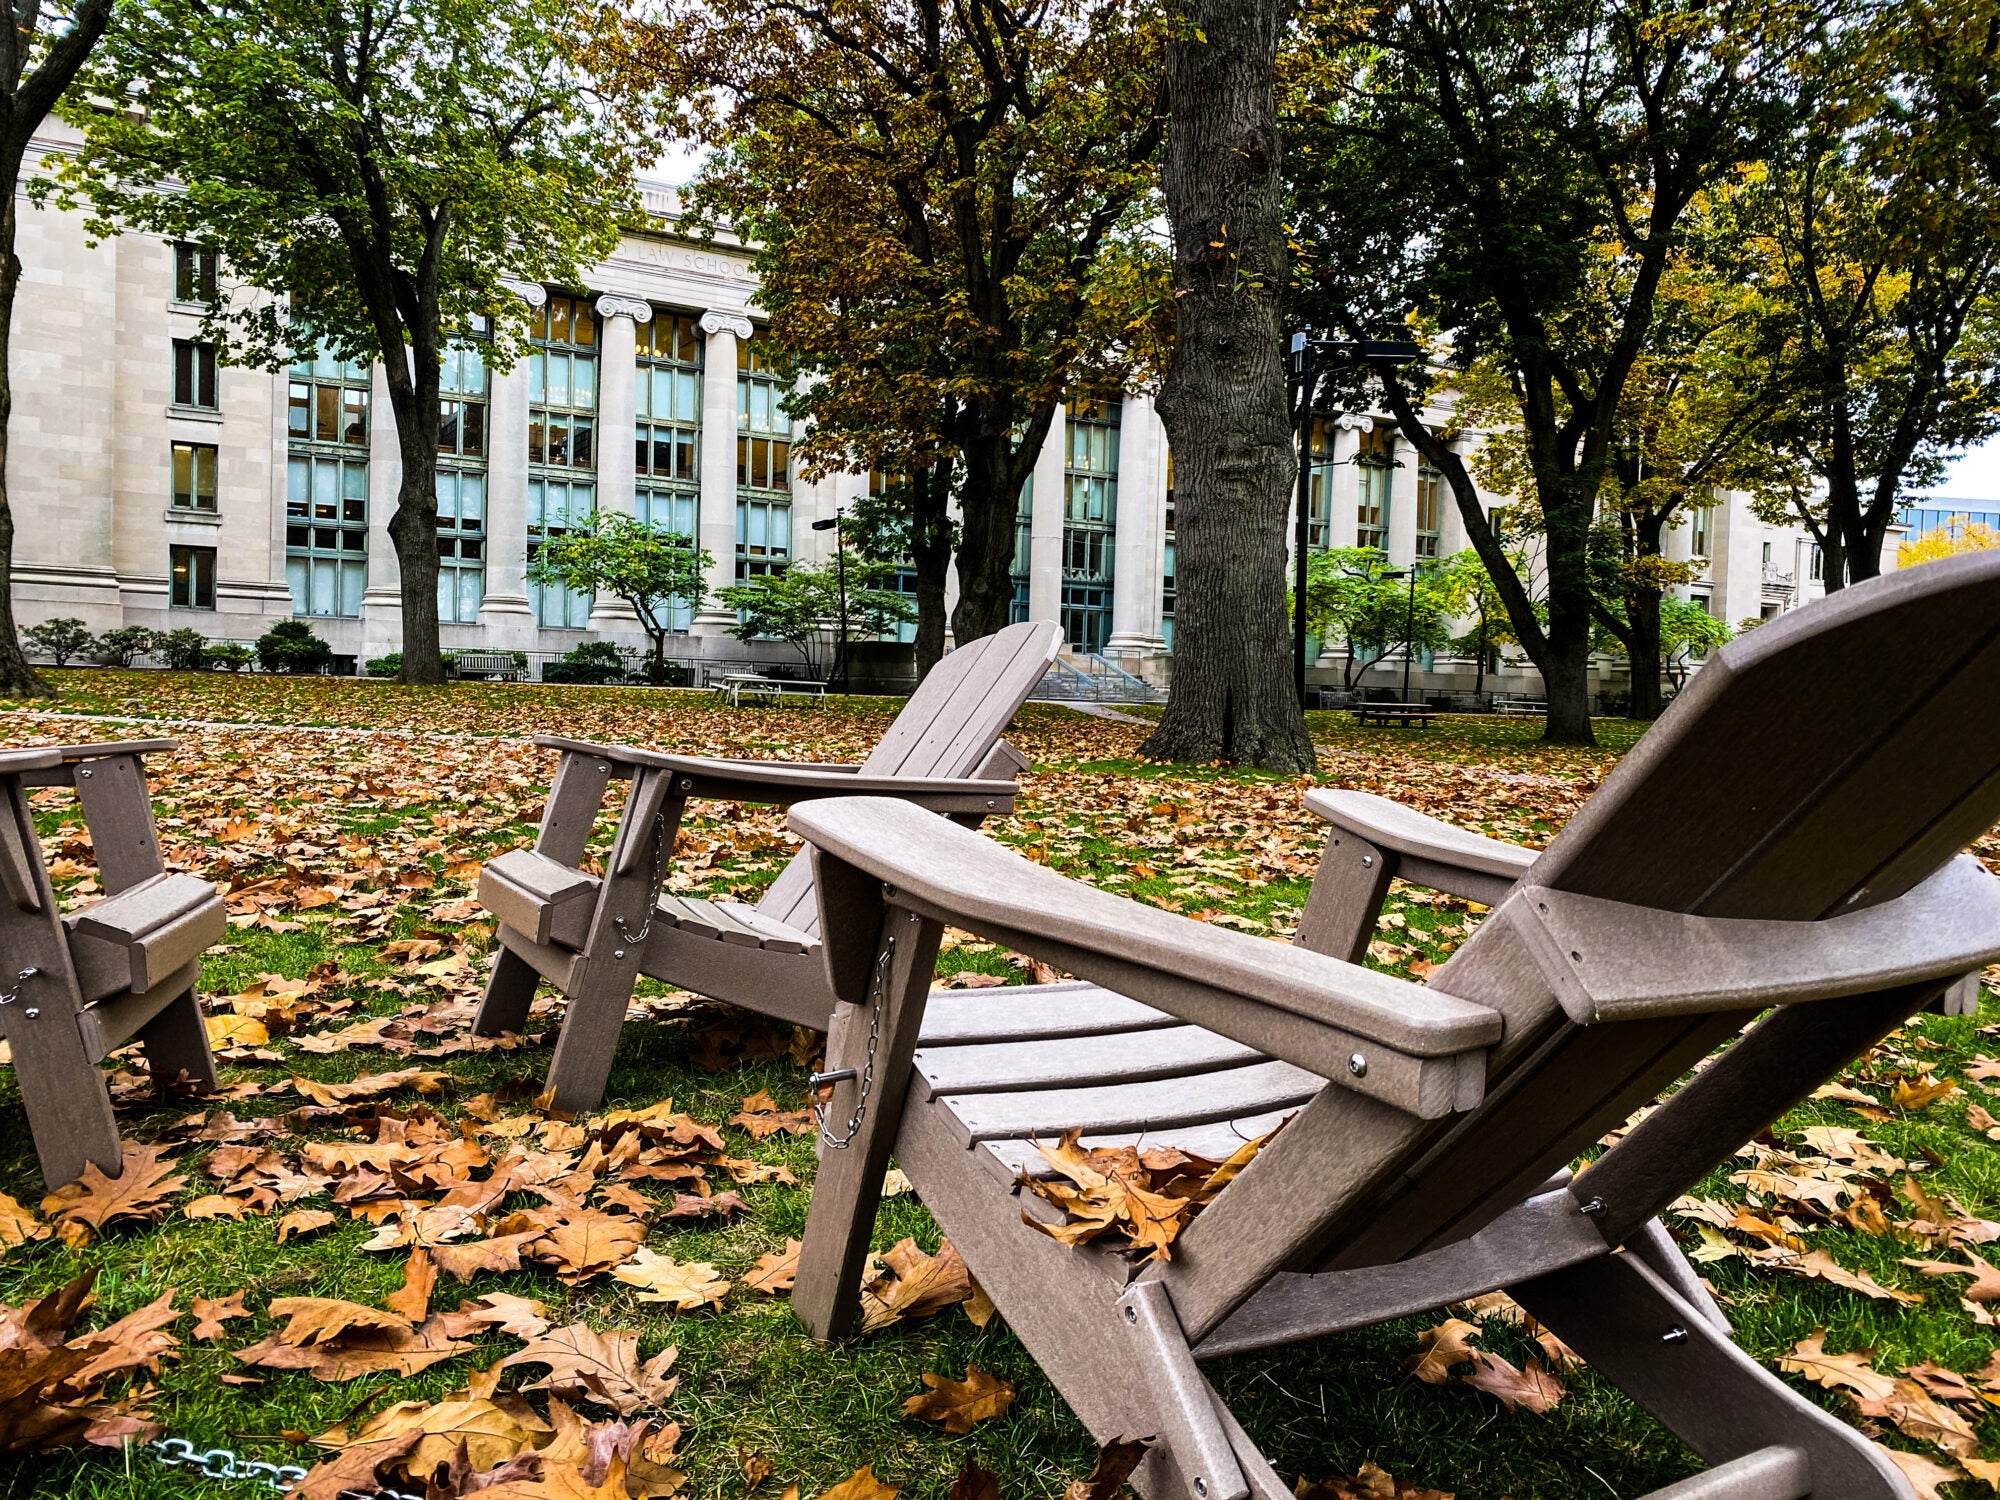 Adirondack chairs surrounded by leaves on Harvard's campus